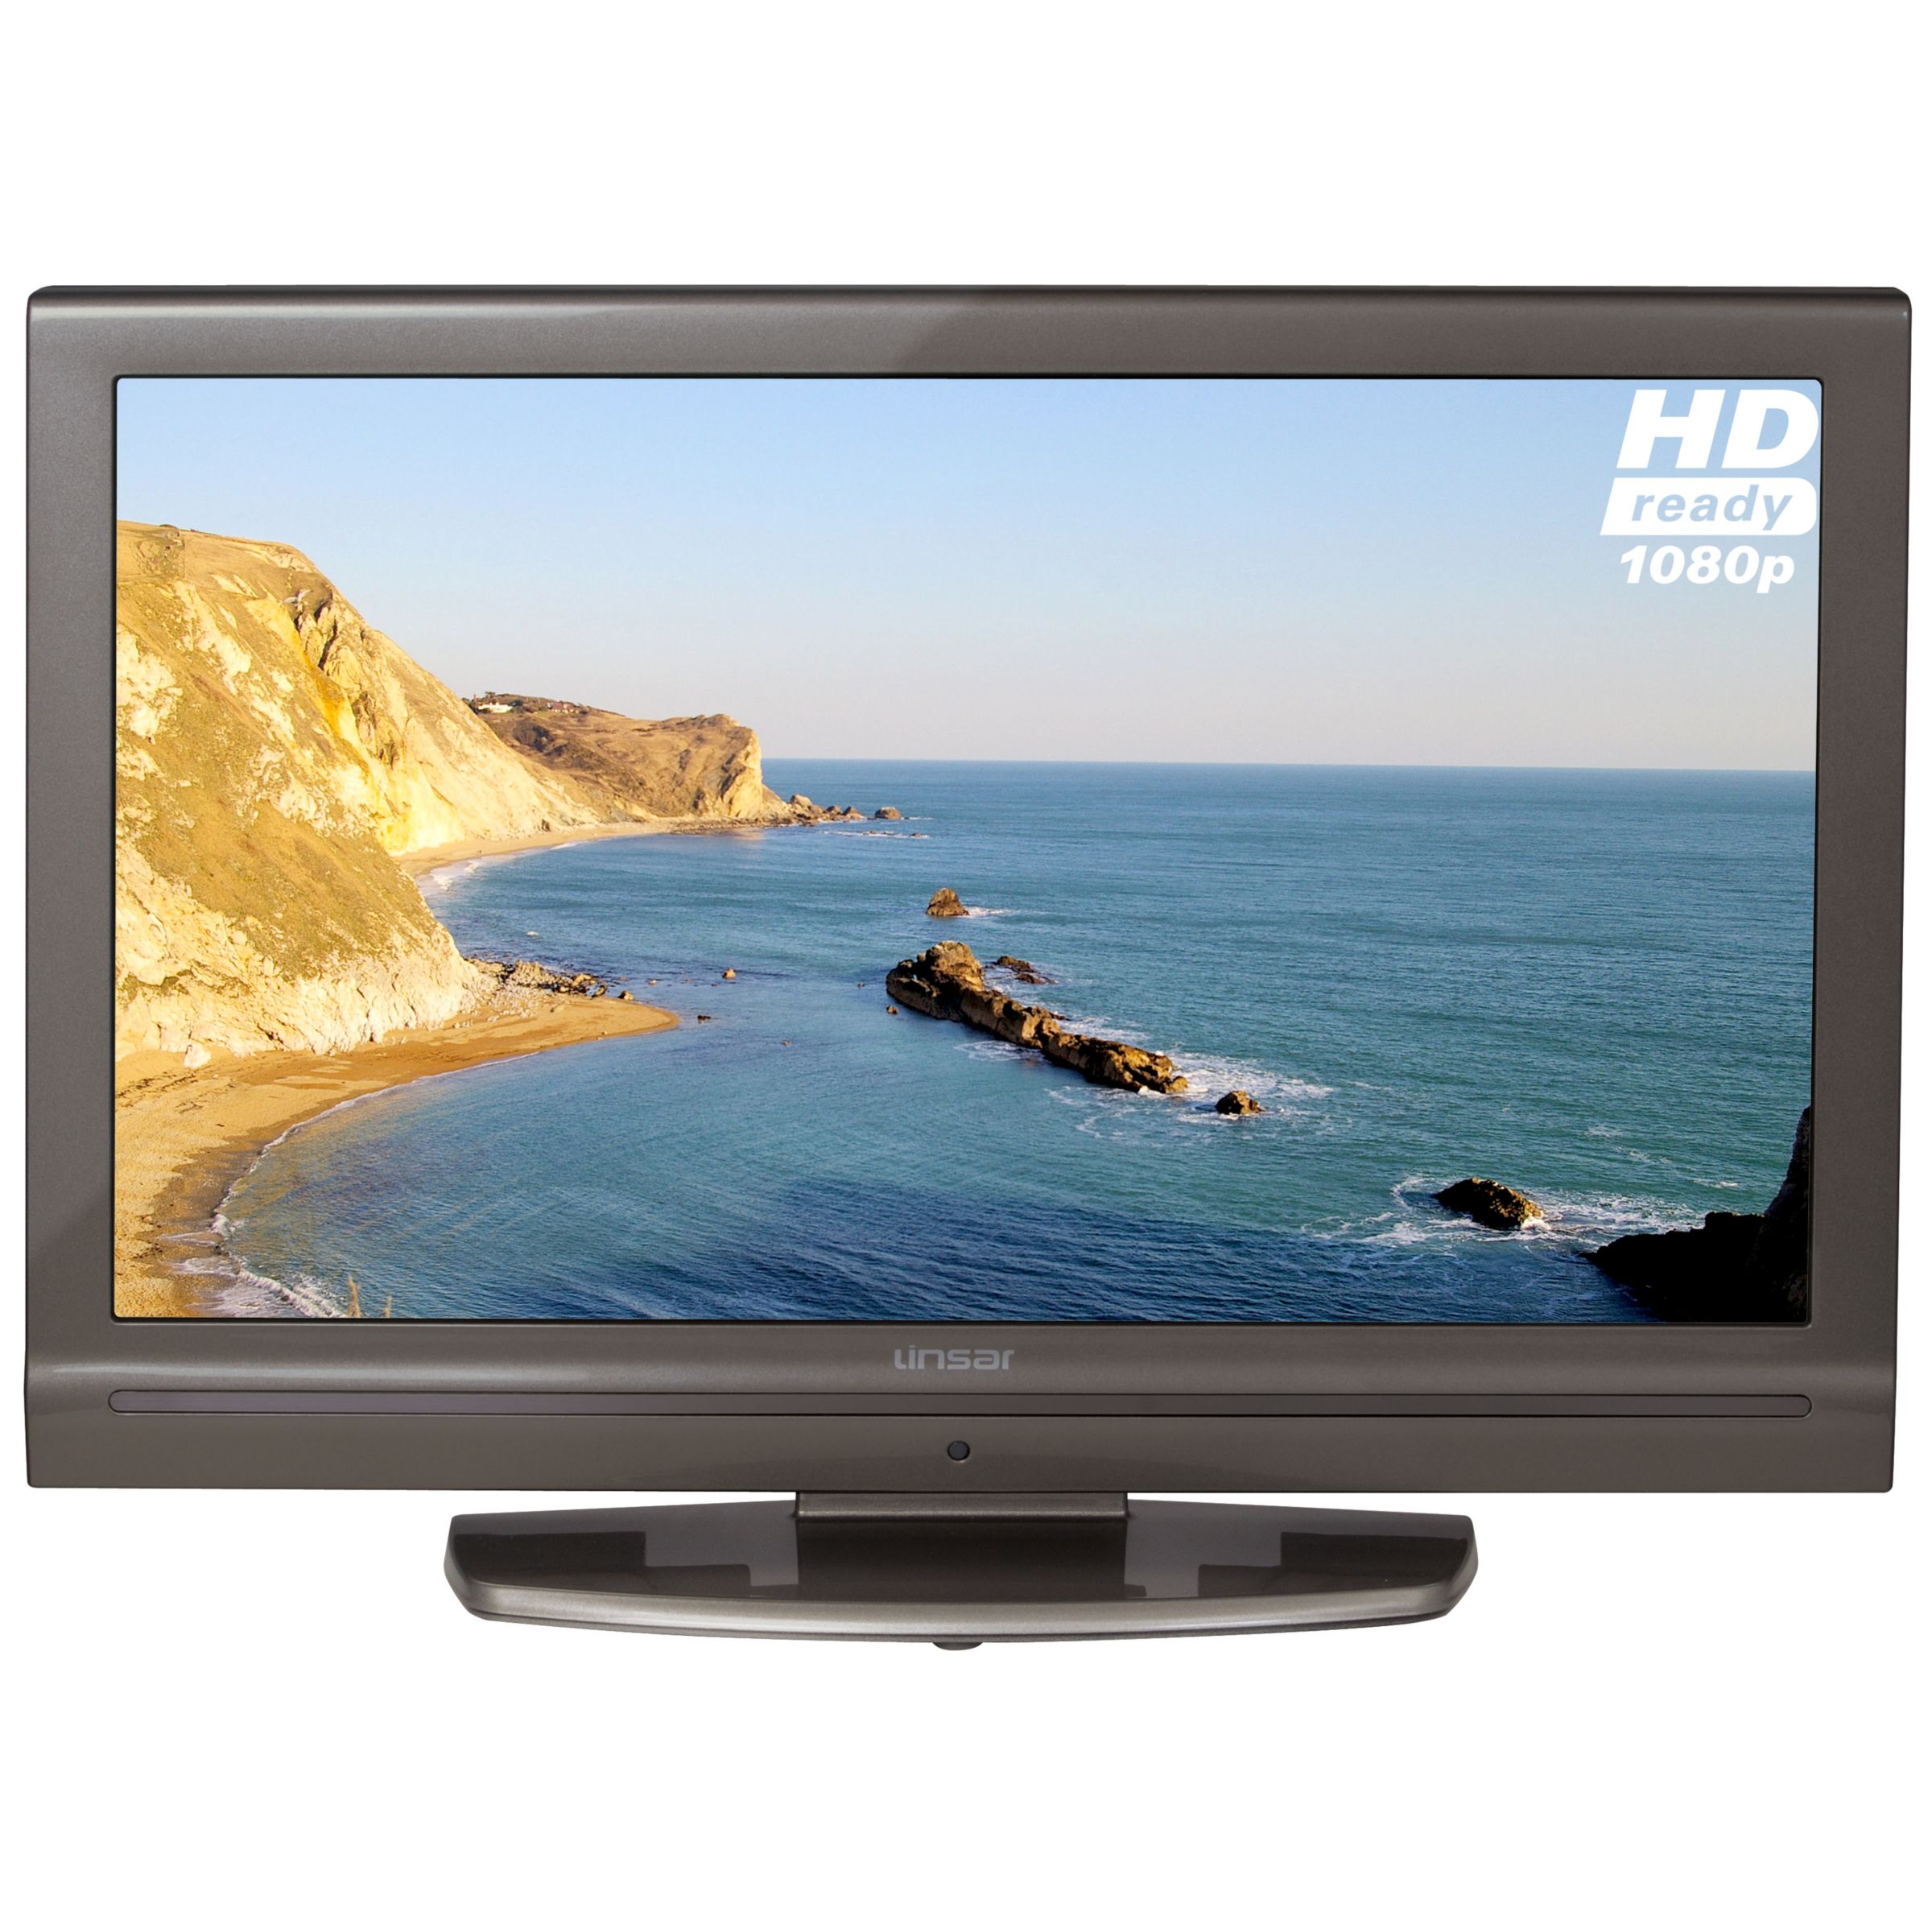 Linsar 22LED805T LED HD 1080p Television/DVD Combi, 22 Inch with Built-in Freeview at John Lewis